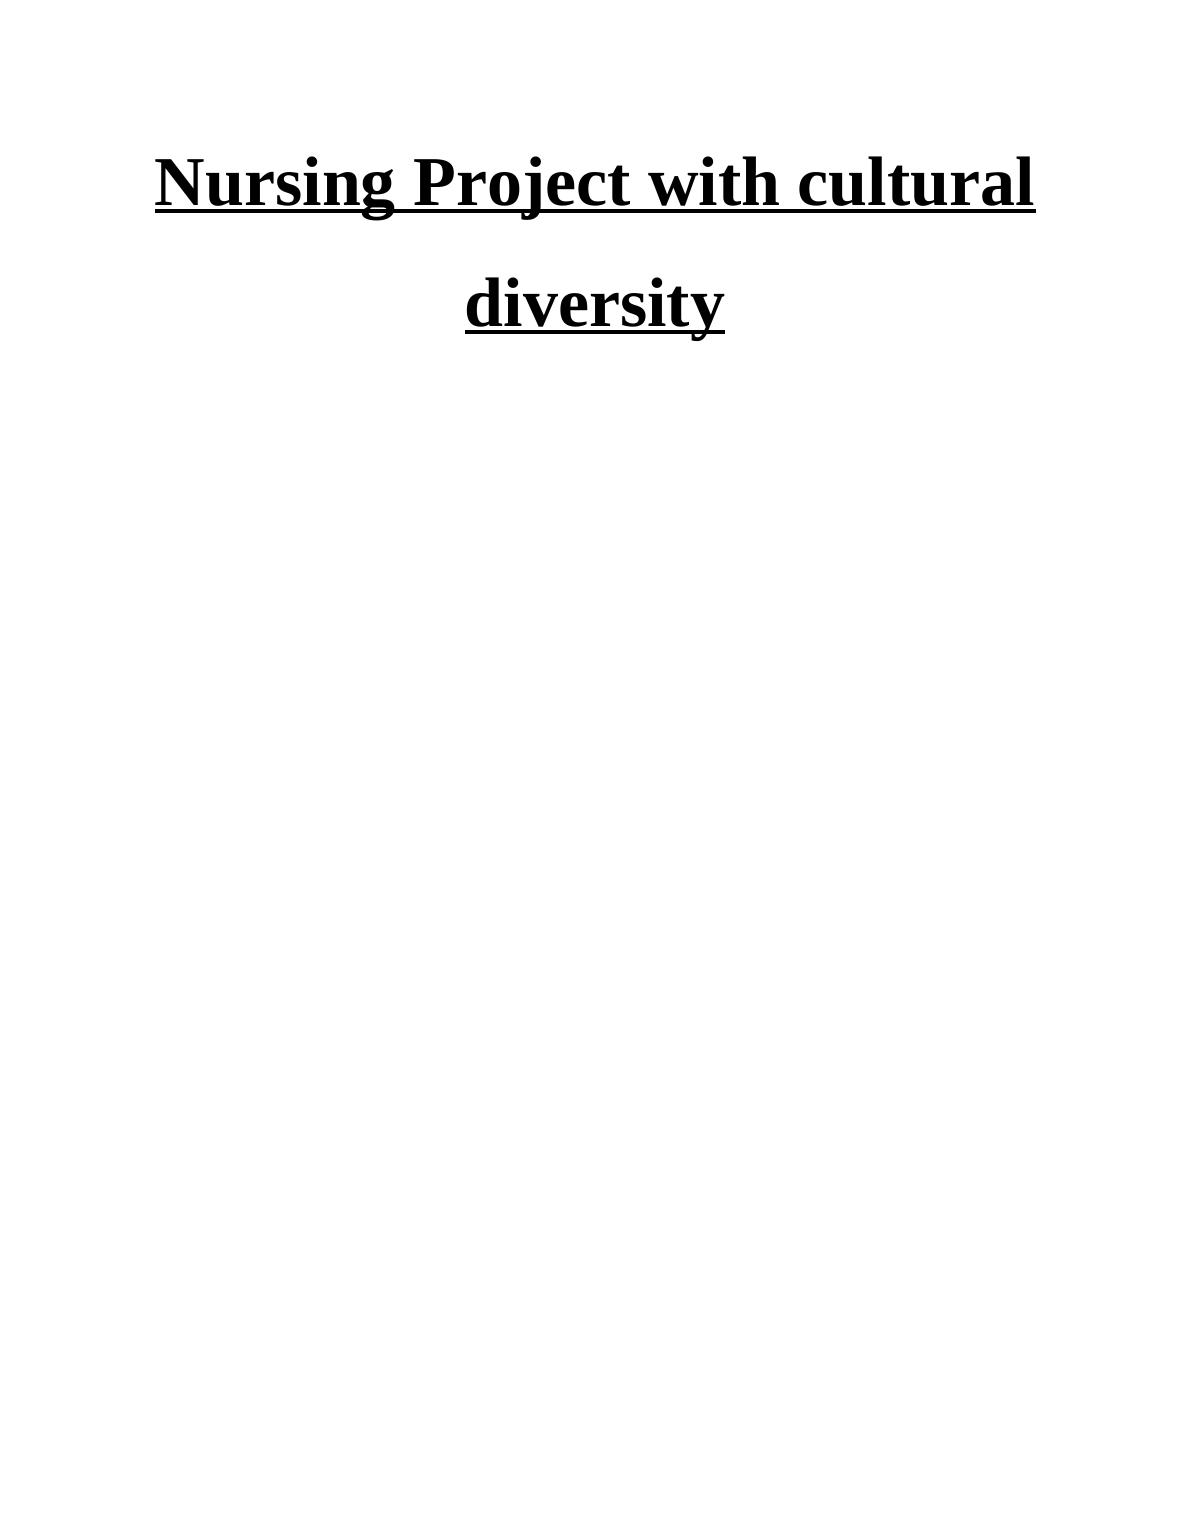 Nursing Project with Cultural Diversity_1